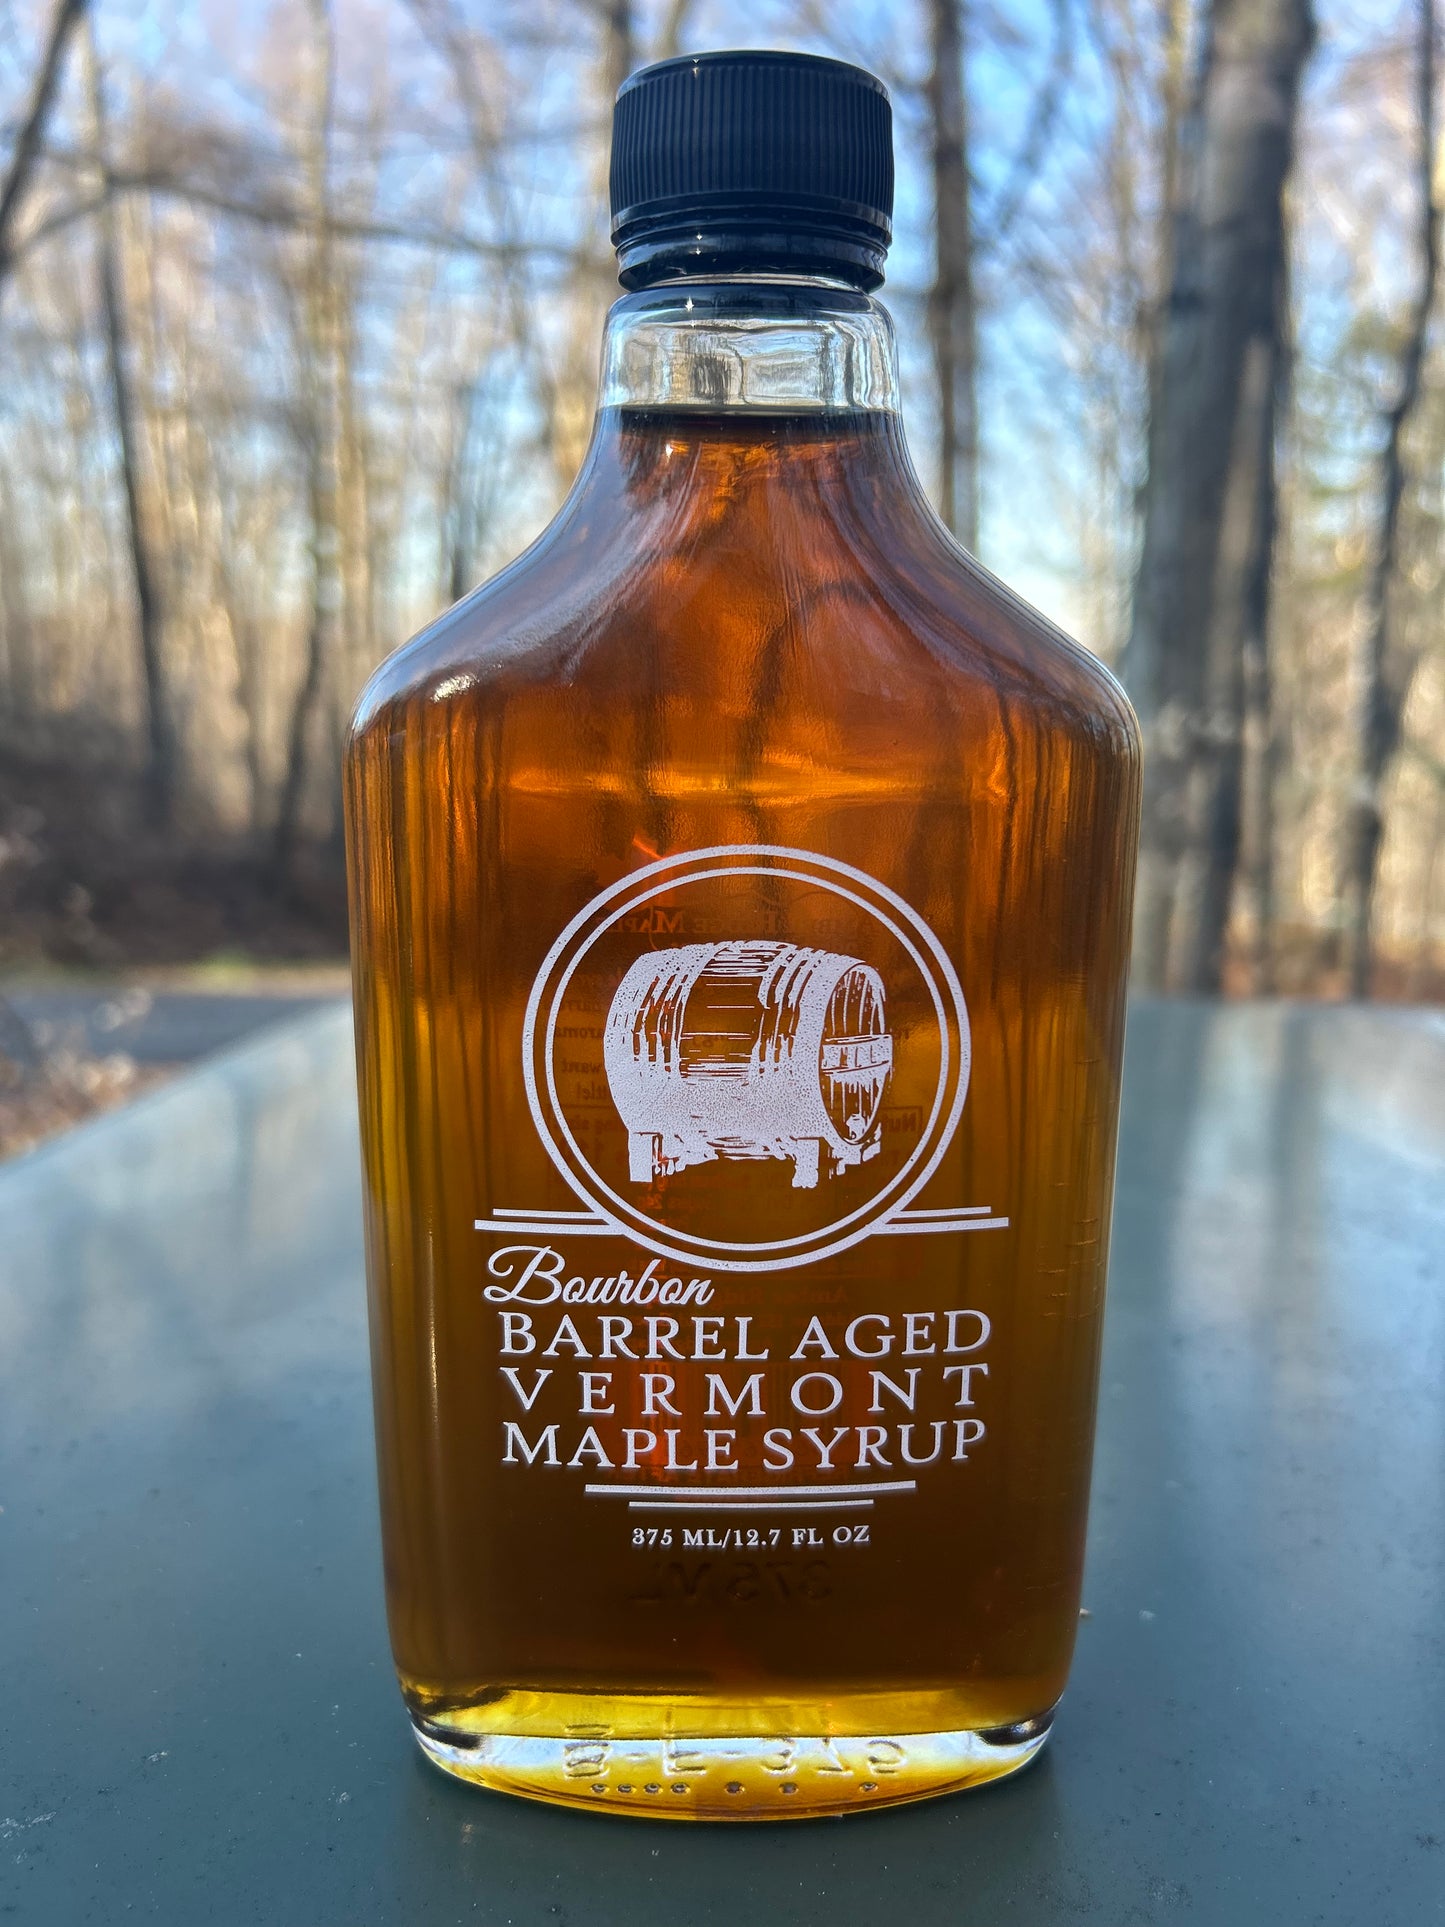 Barrel Aged Vermont Maple Syrup